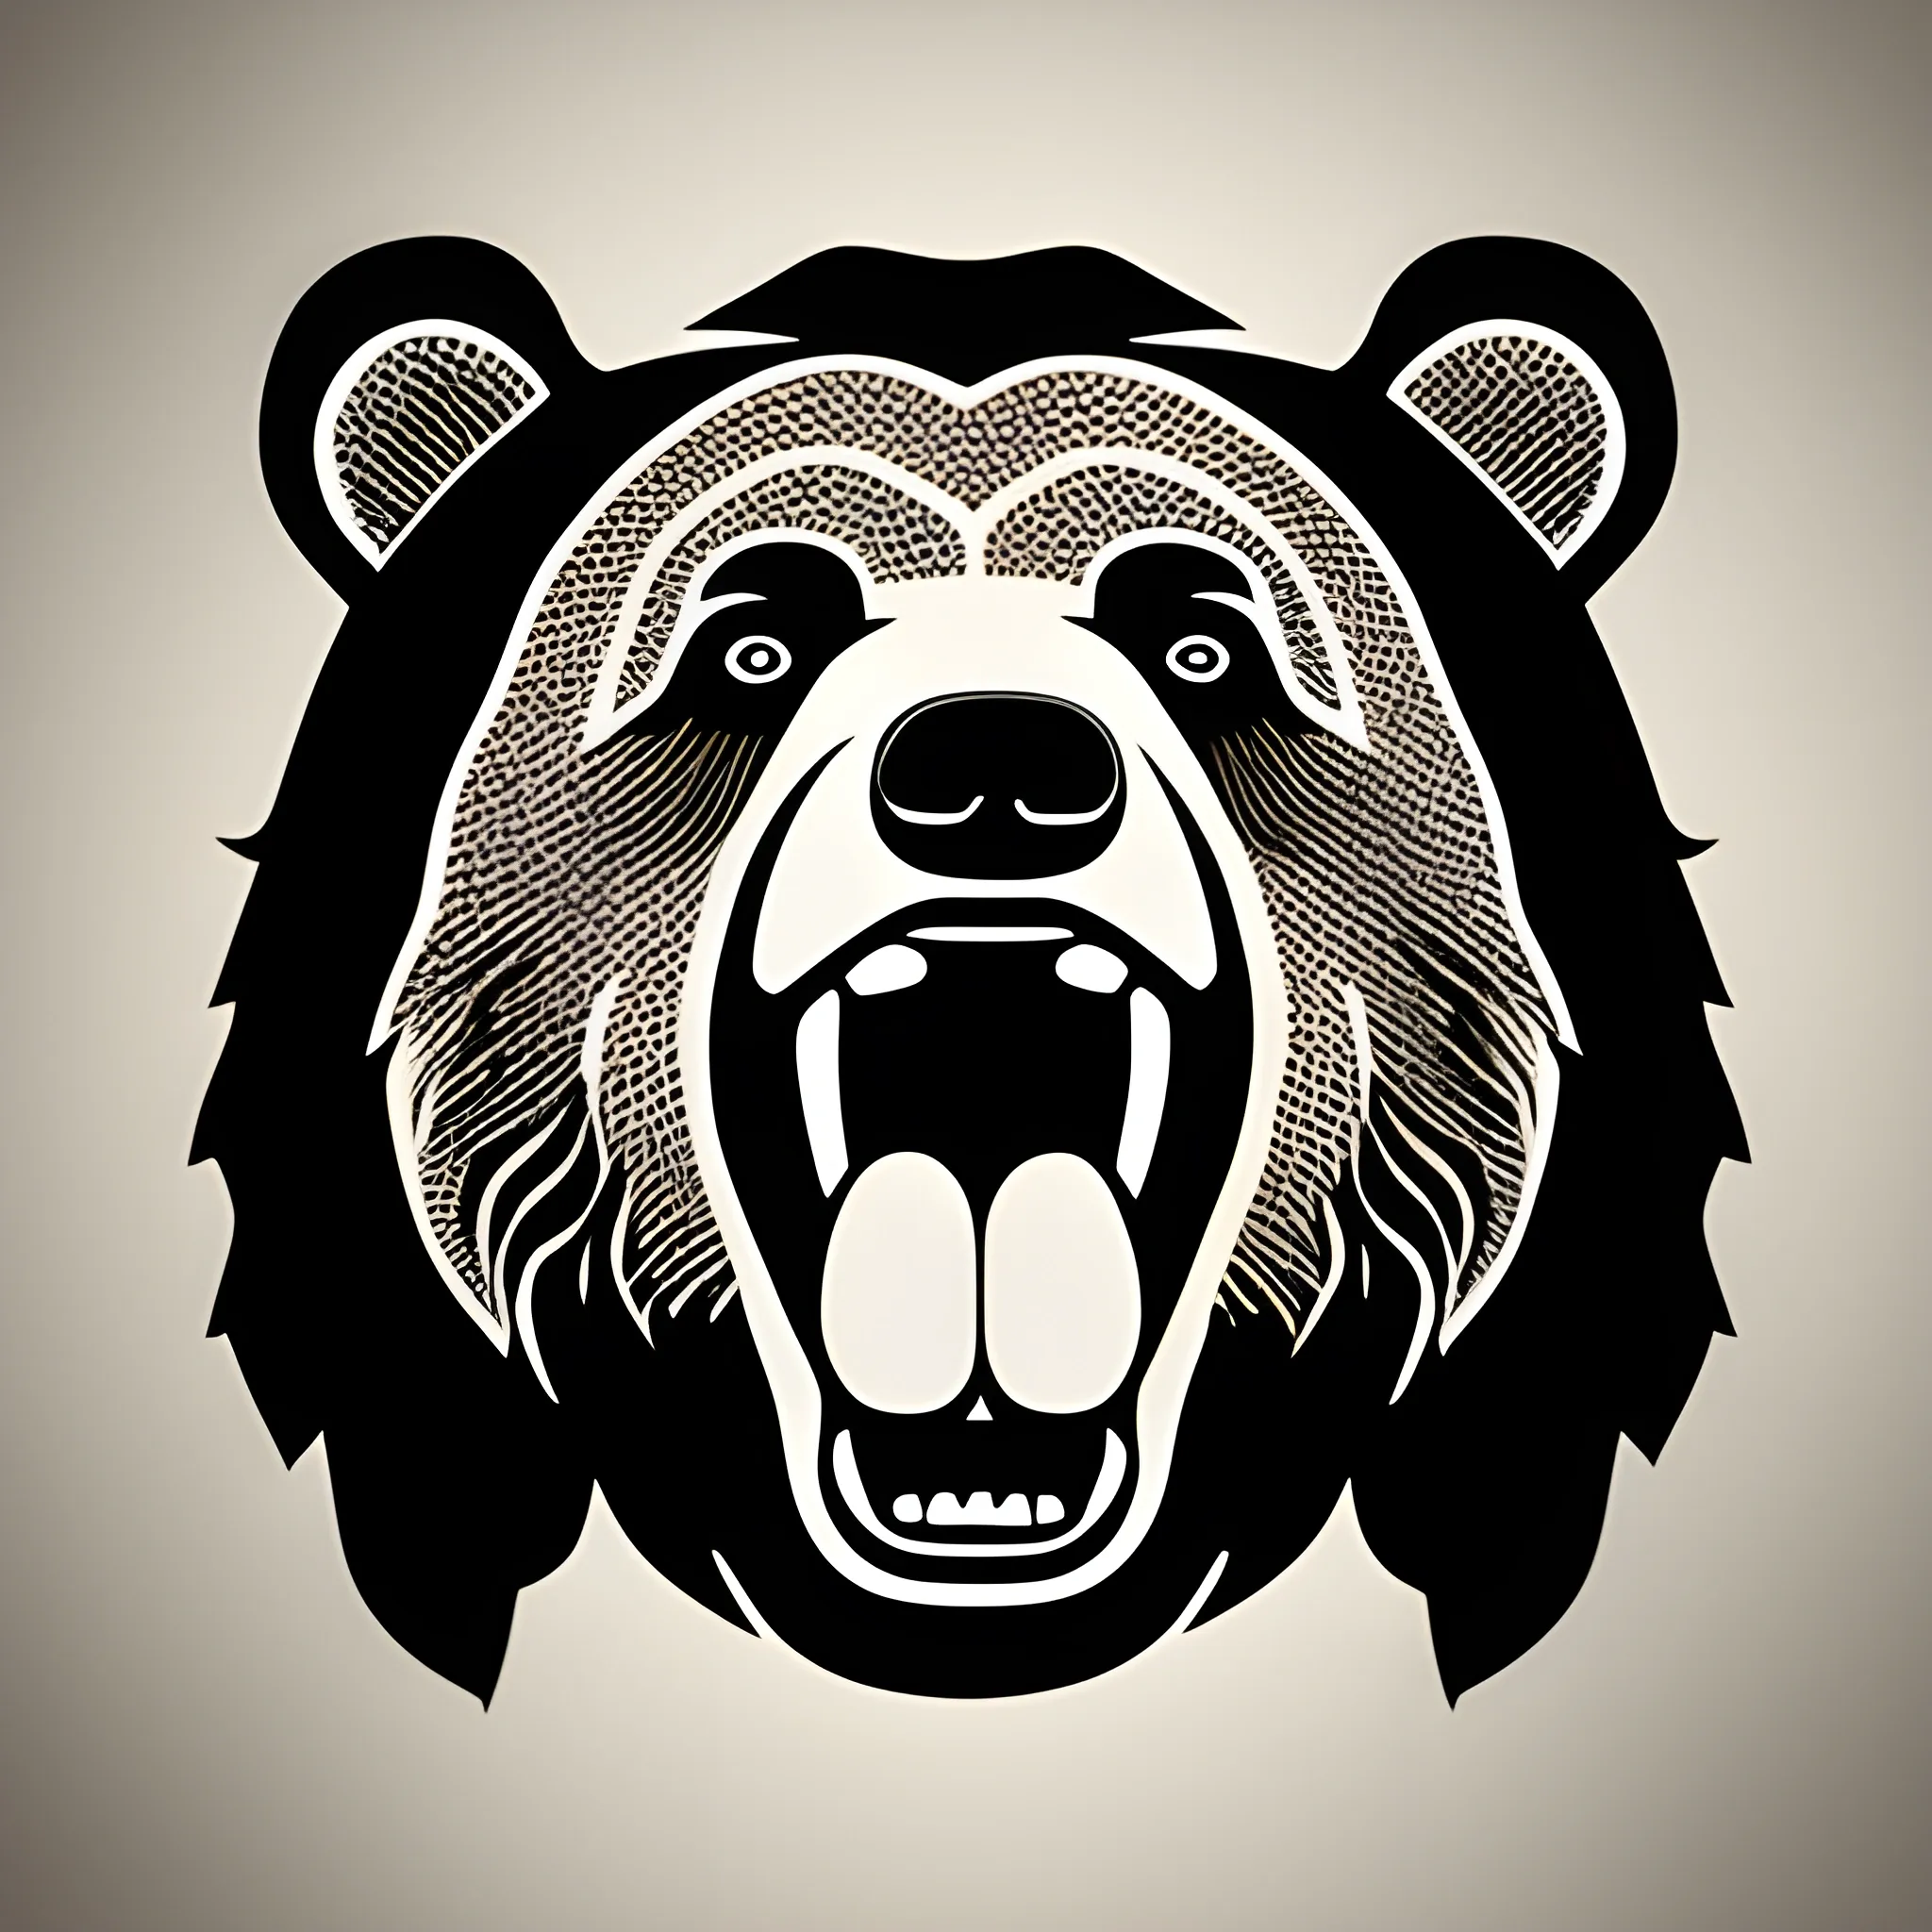 grizzly bear eating burger logo style